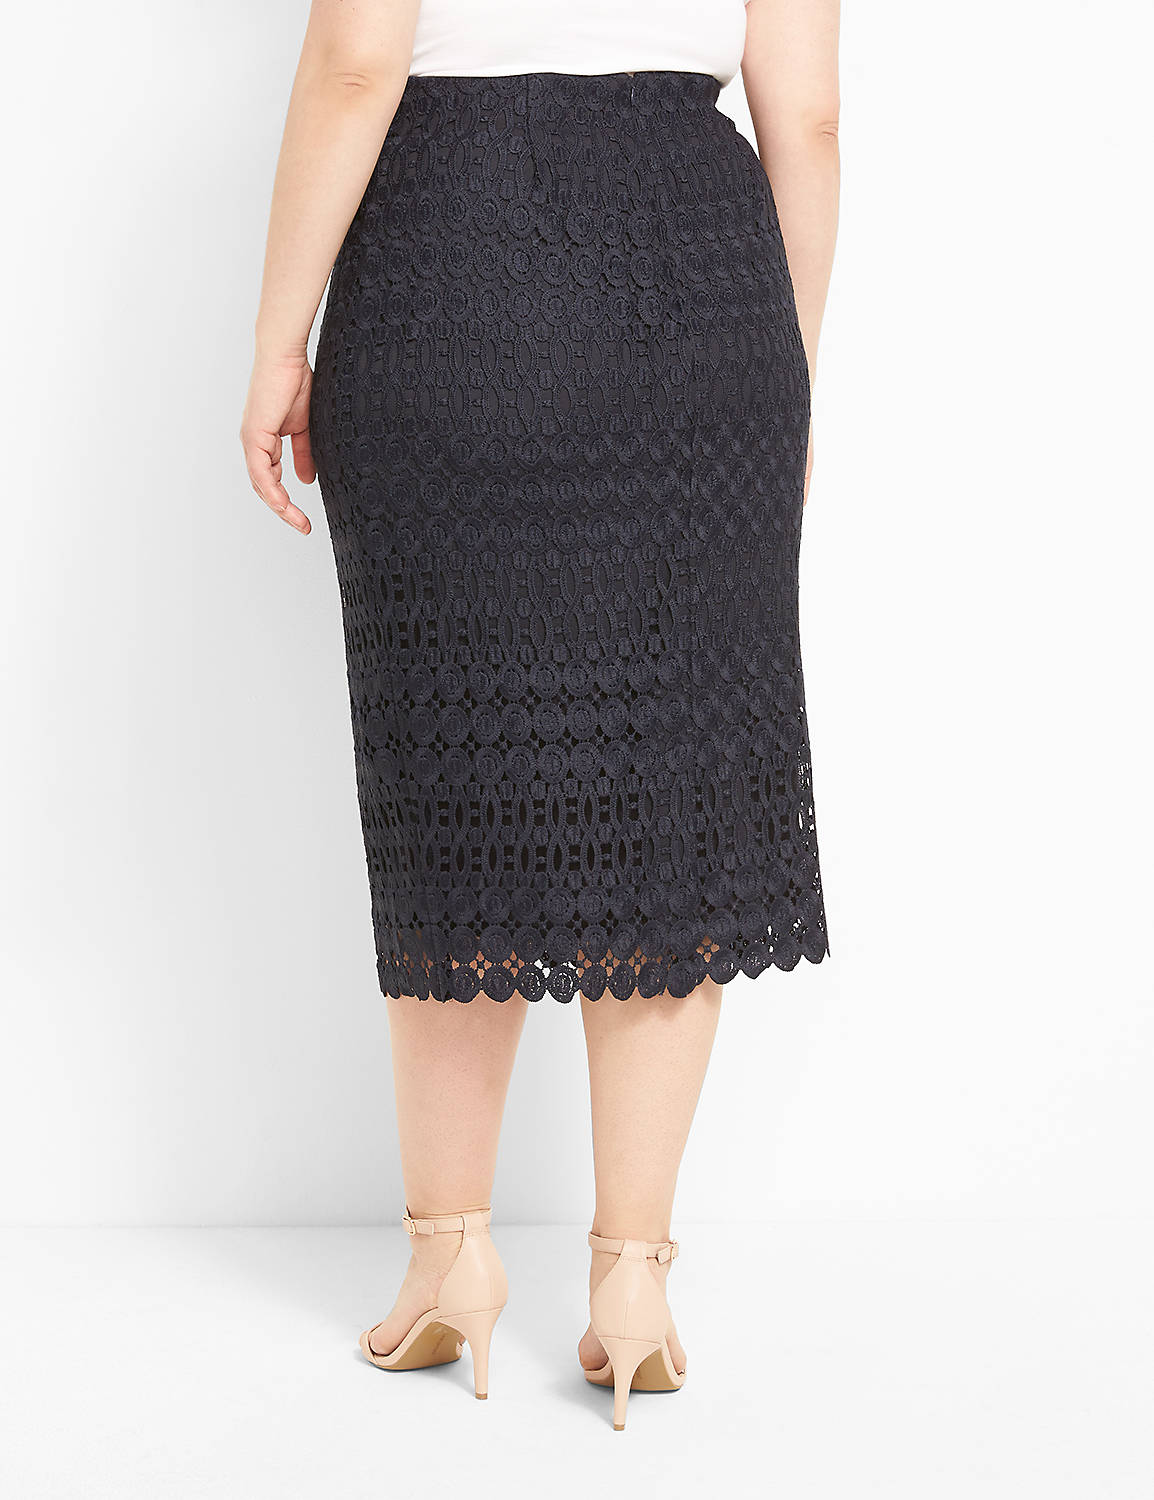 Lace Pencil Skirt 1127712 Product Image 2